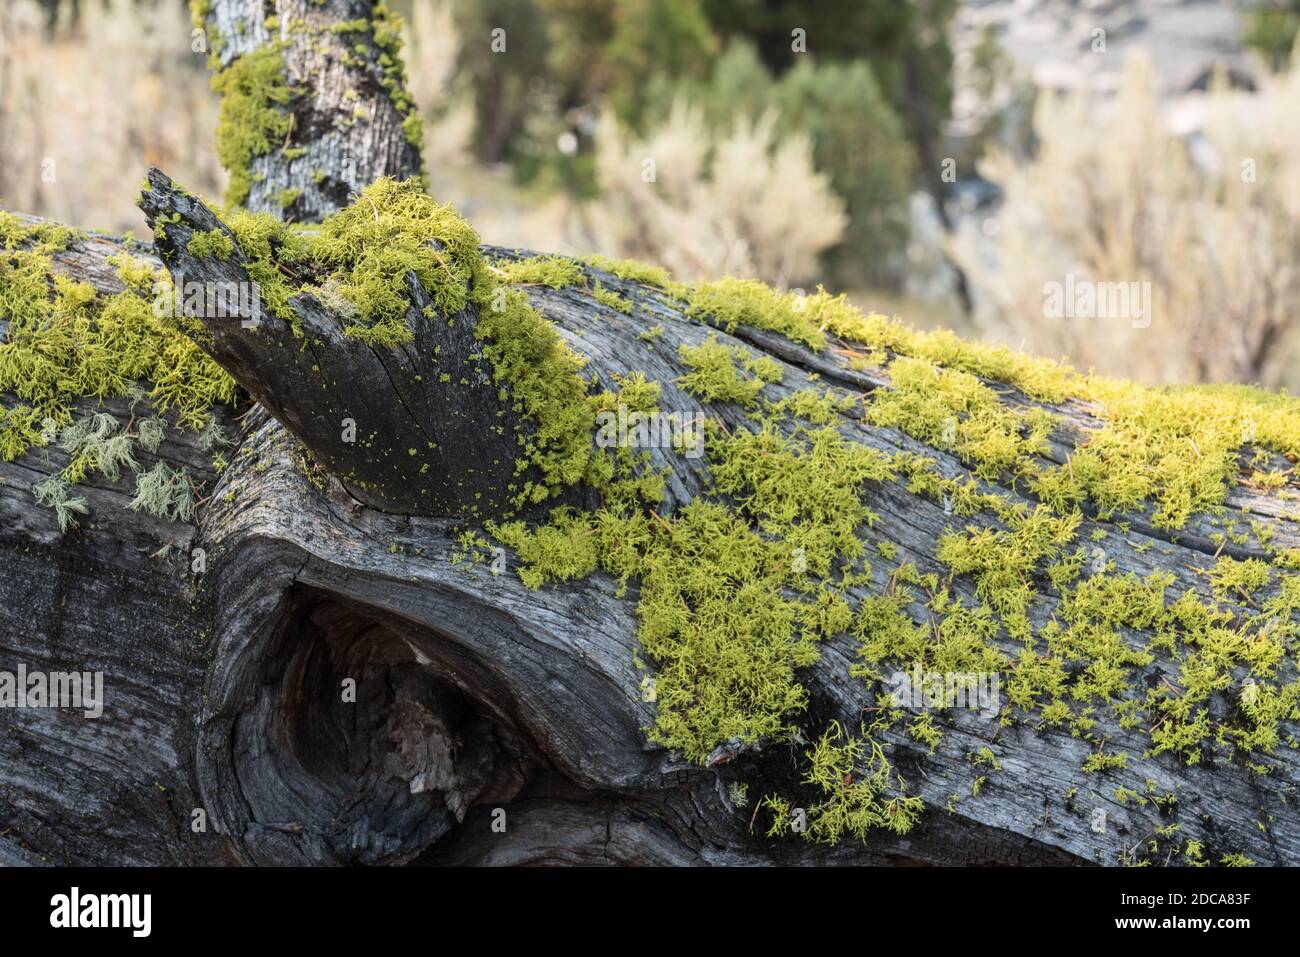 Wolf lichen, a filamentous lichen, commonly grows on the bark of both living and dead conifers in Yellowstone National Park, Wyoming, USA. Stock Photo